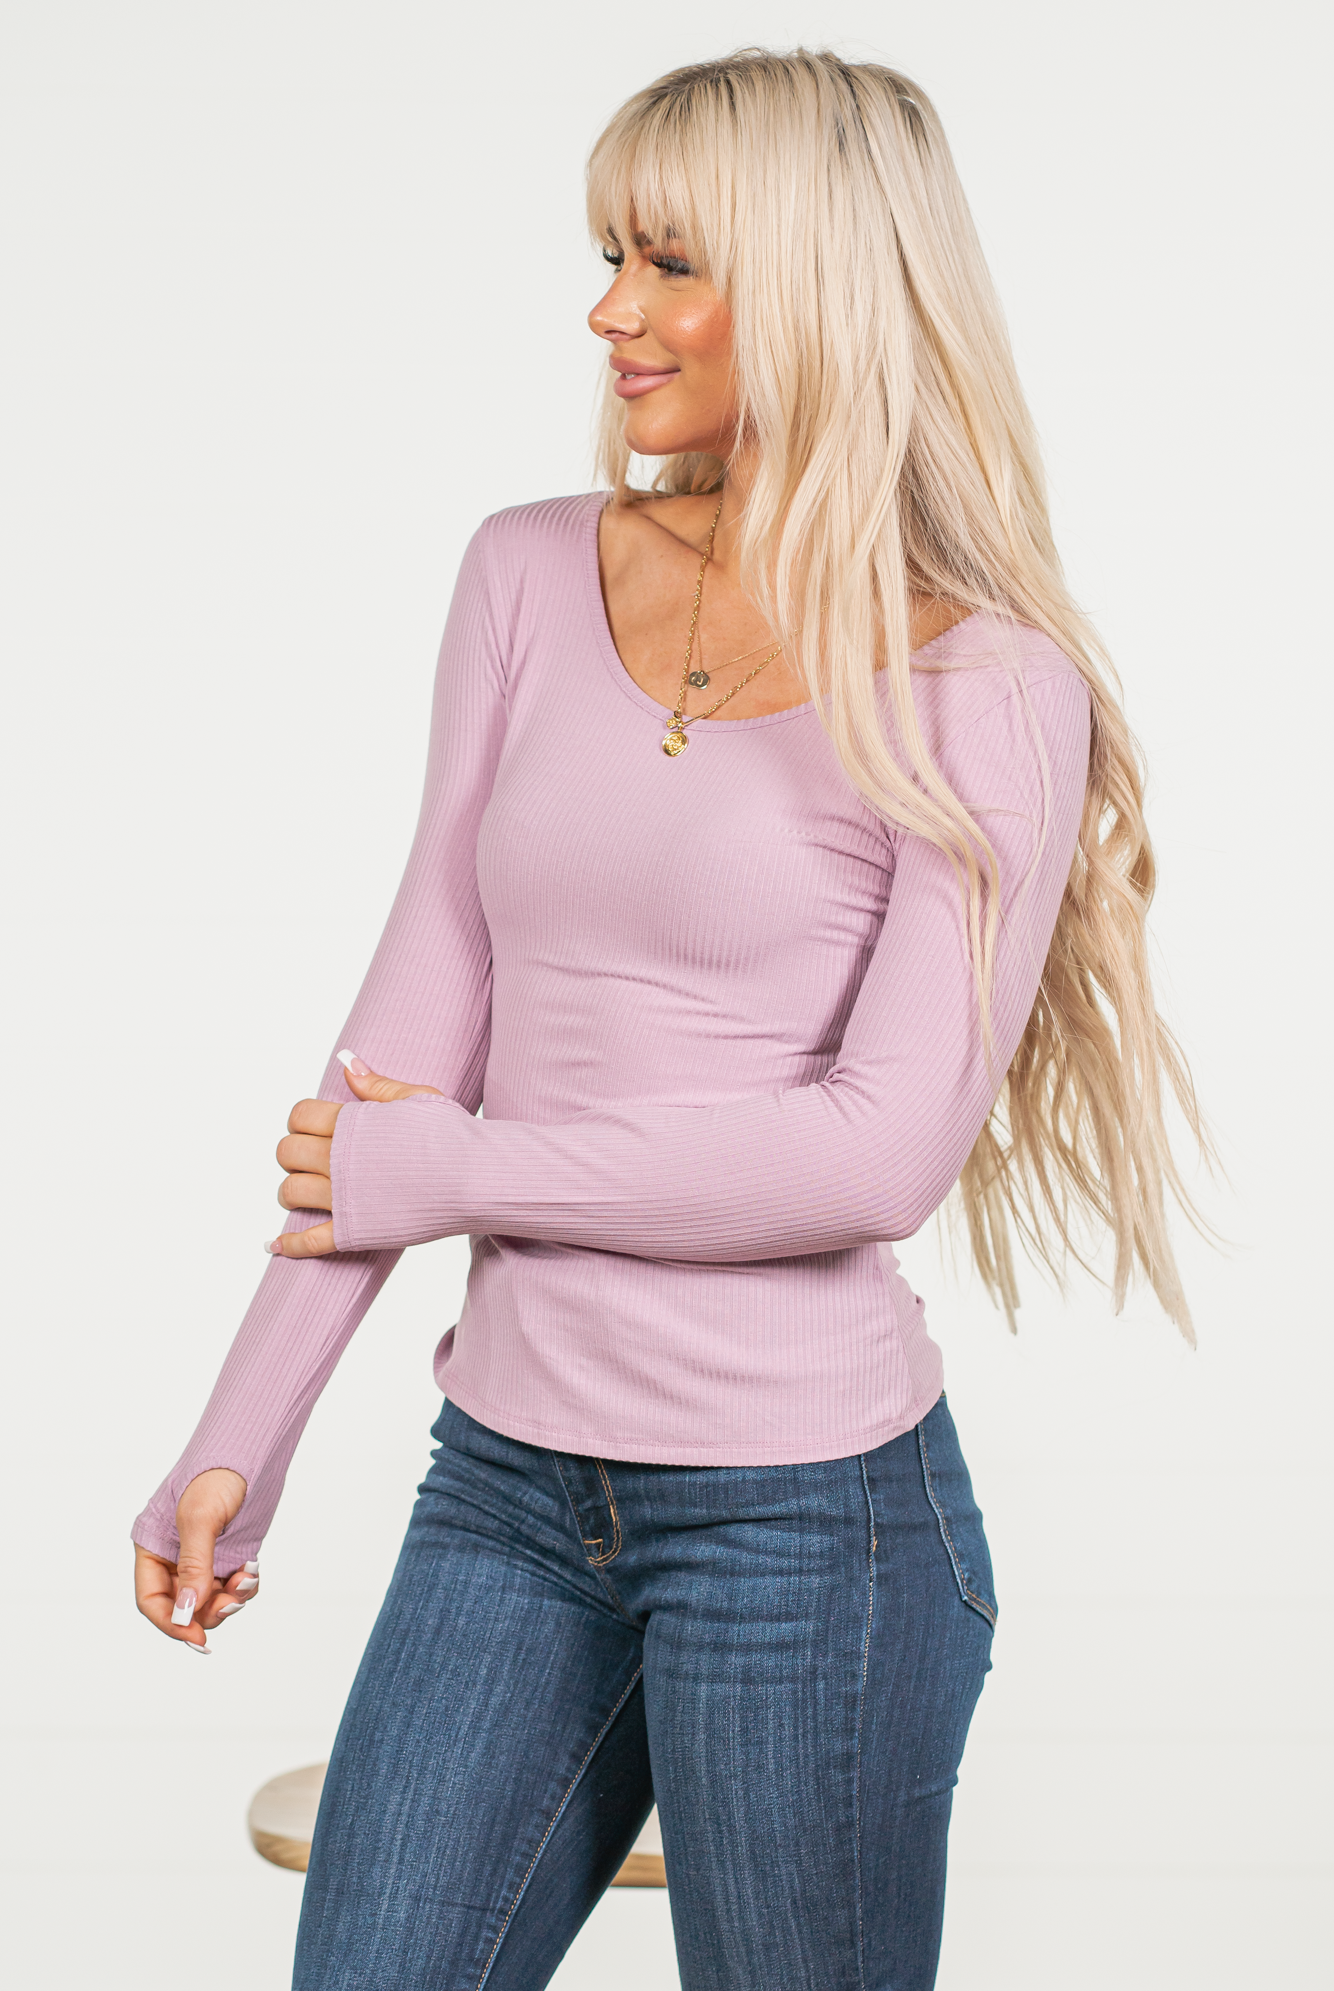 The perfect basic top to pair with your favorite jeans!  Color: Mauve Neckline: Round  Sleeve: Long, Thumb Holes 93% Rayon 7% Spandex  Style #: CWTTL296-Mauve Contact us for any additional measurements or sizing.        